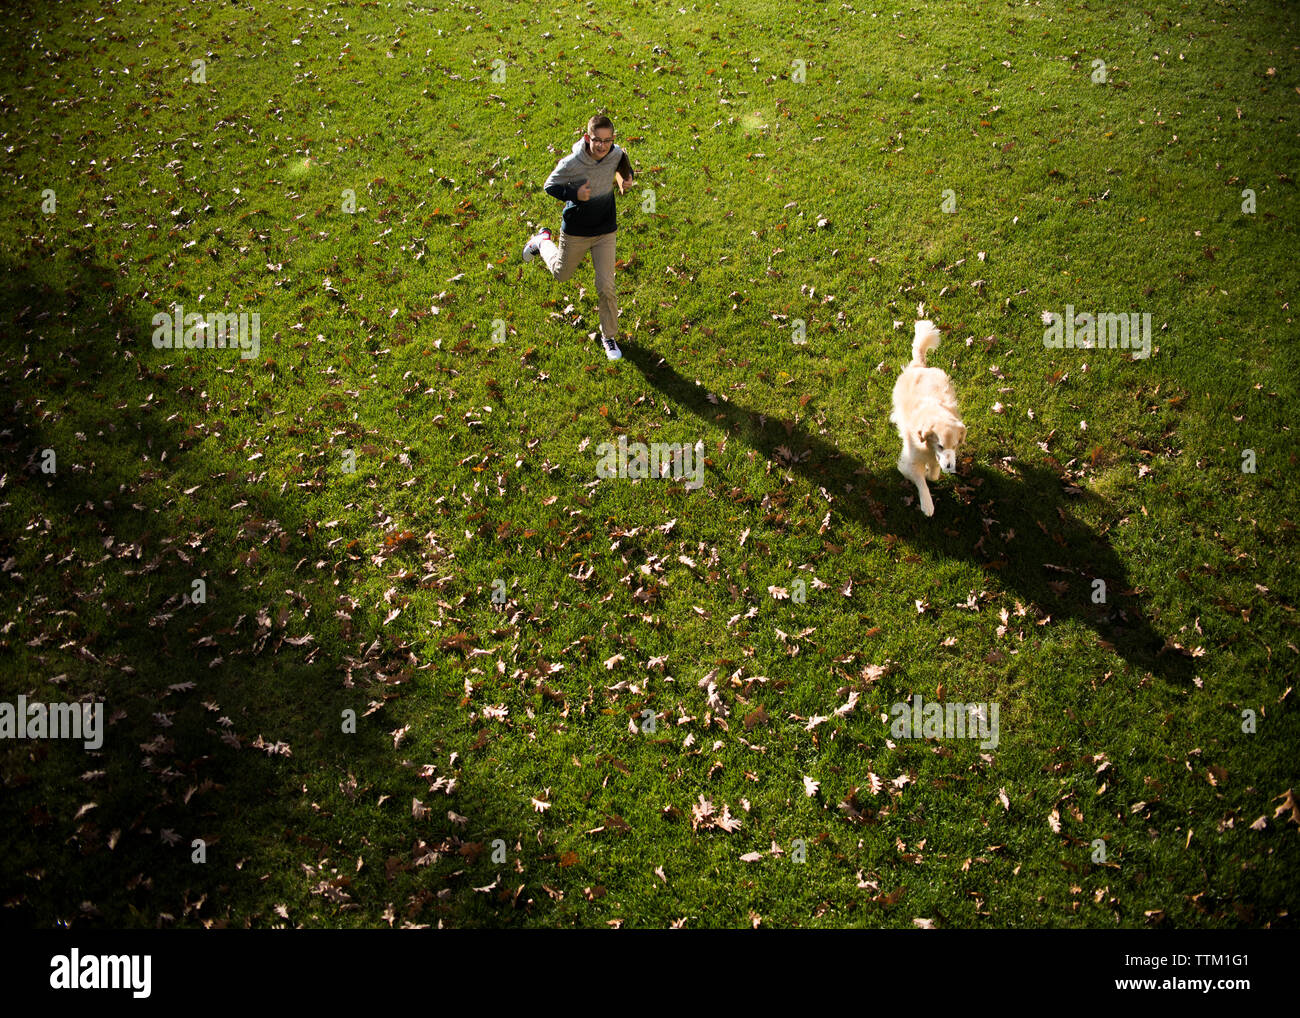 High angle view of teenage boy and Golden Retriever running on grassy field in park during autumn Stock Photo